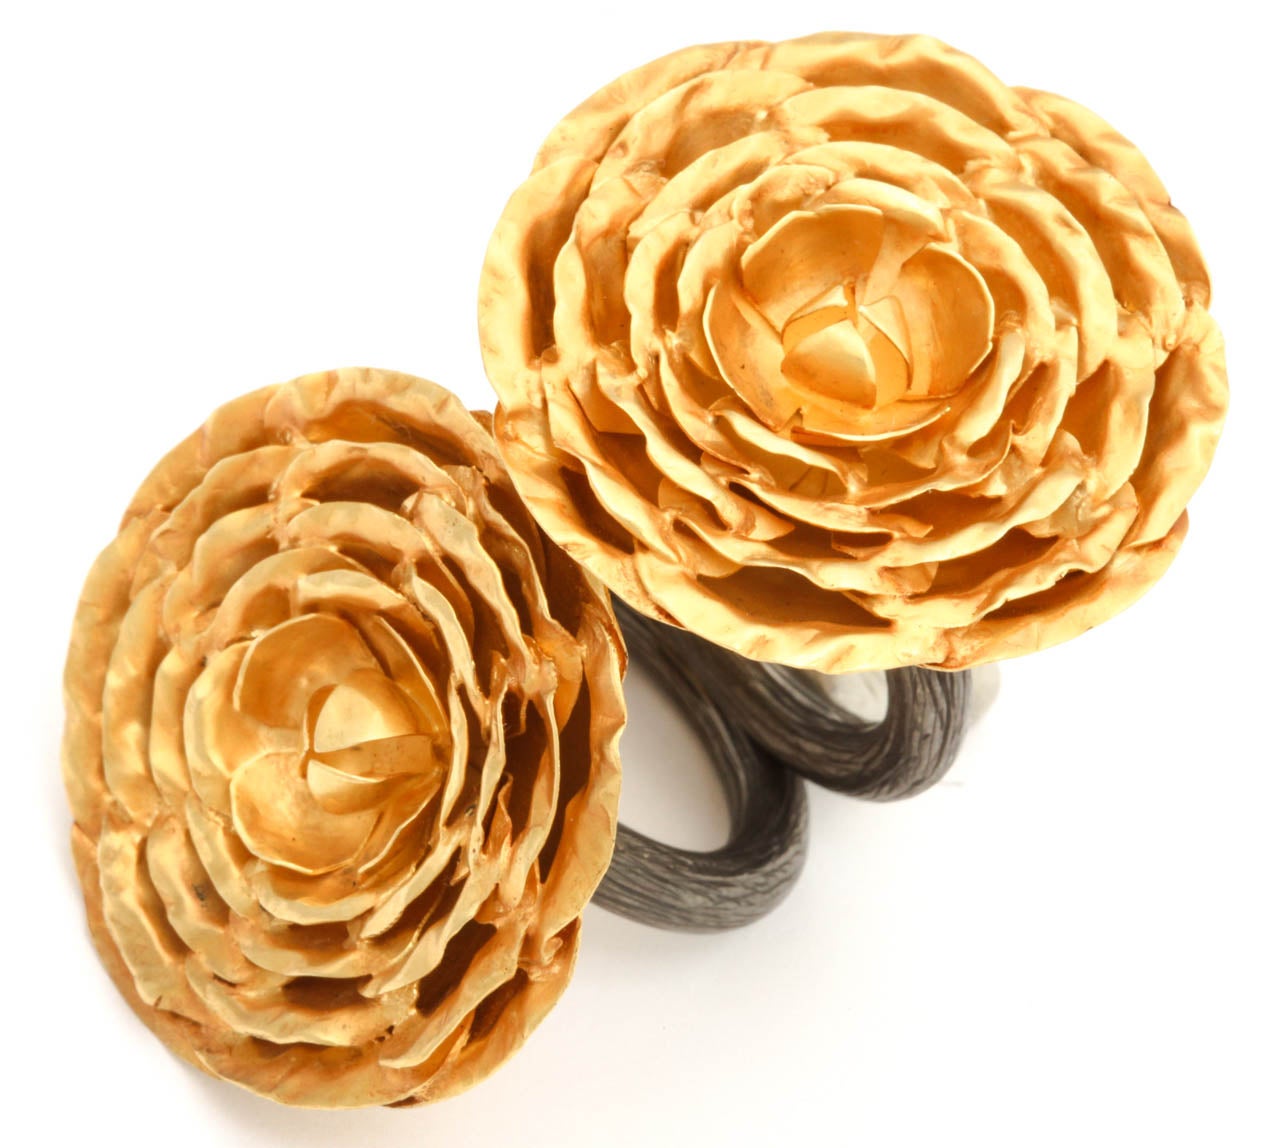 A pair of peonies rings. The rings are composed of hand made 18kt yellow gold peony flowers that are attached to rhodium plated sterling silver vine shanks. The ring size is easily adjustable since the shank is open.
Width: 1.35 inches
Flower